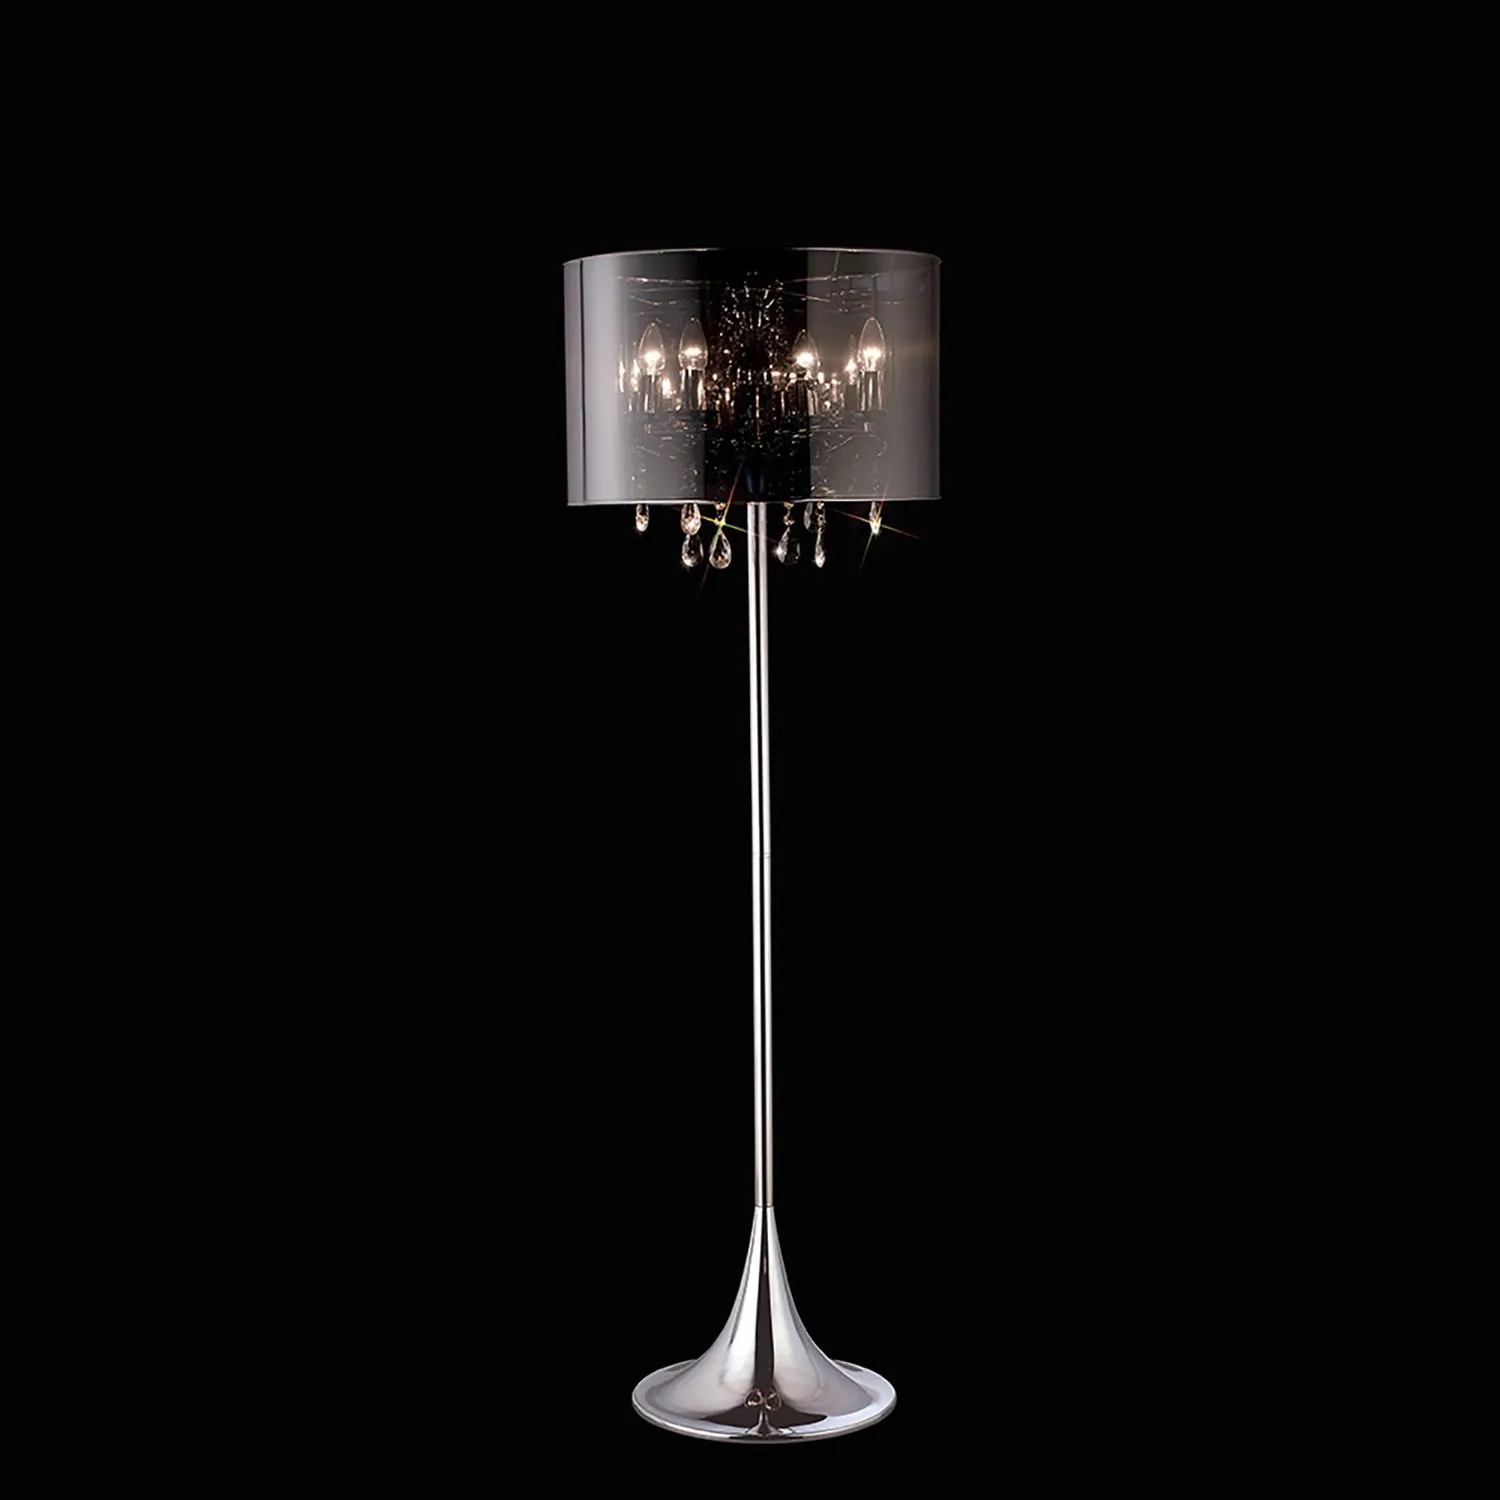 Trace Floor Lamp With Chrome Shade 4 Light E14 Polished Chrome PVC Crystal, NOT LED CFL Compatible